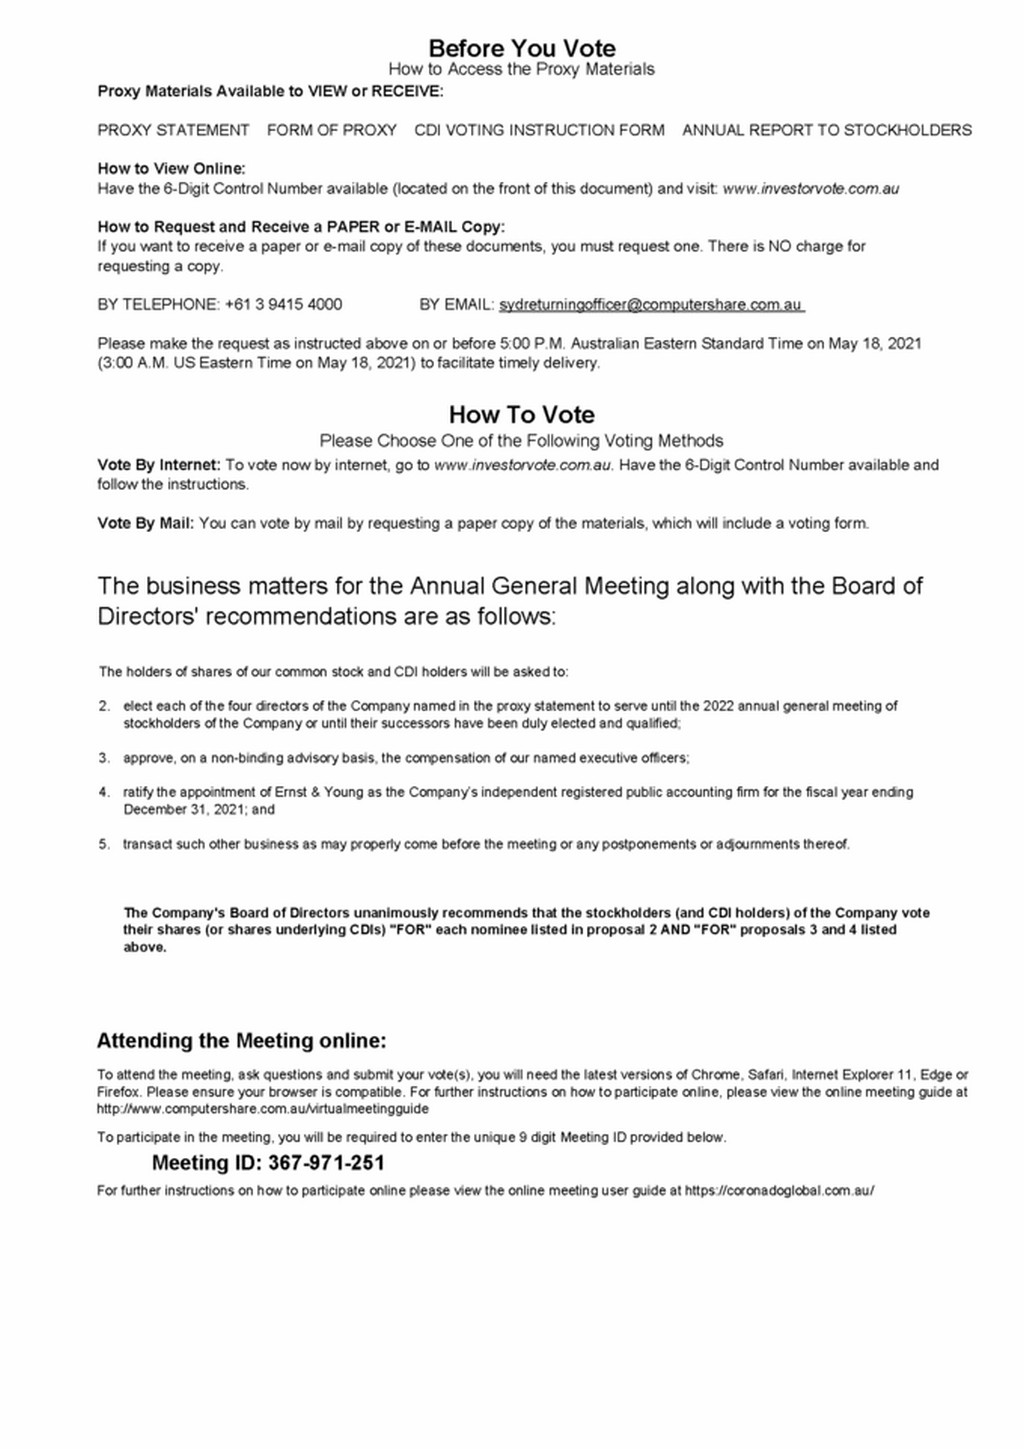 2690-2-ba_crn 2021 agm -mailpack_v4_page_2.gif